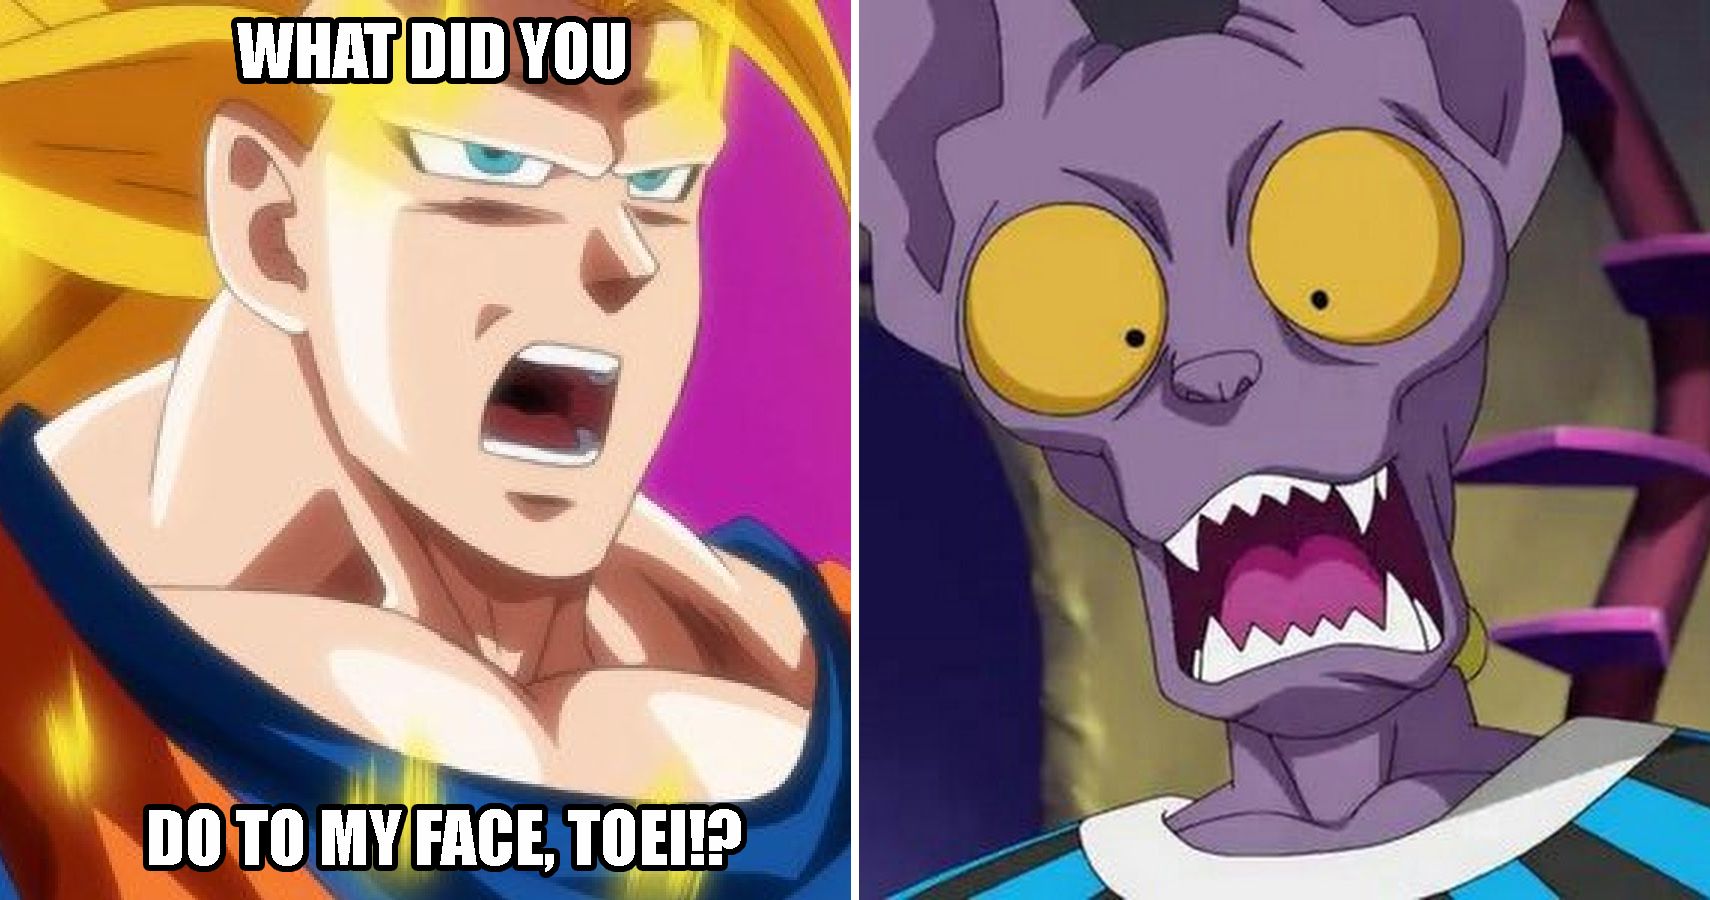 12 Hilarious Anime Memes That Only Fans Will Get